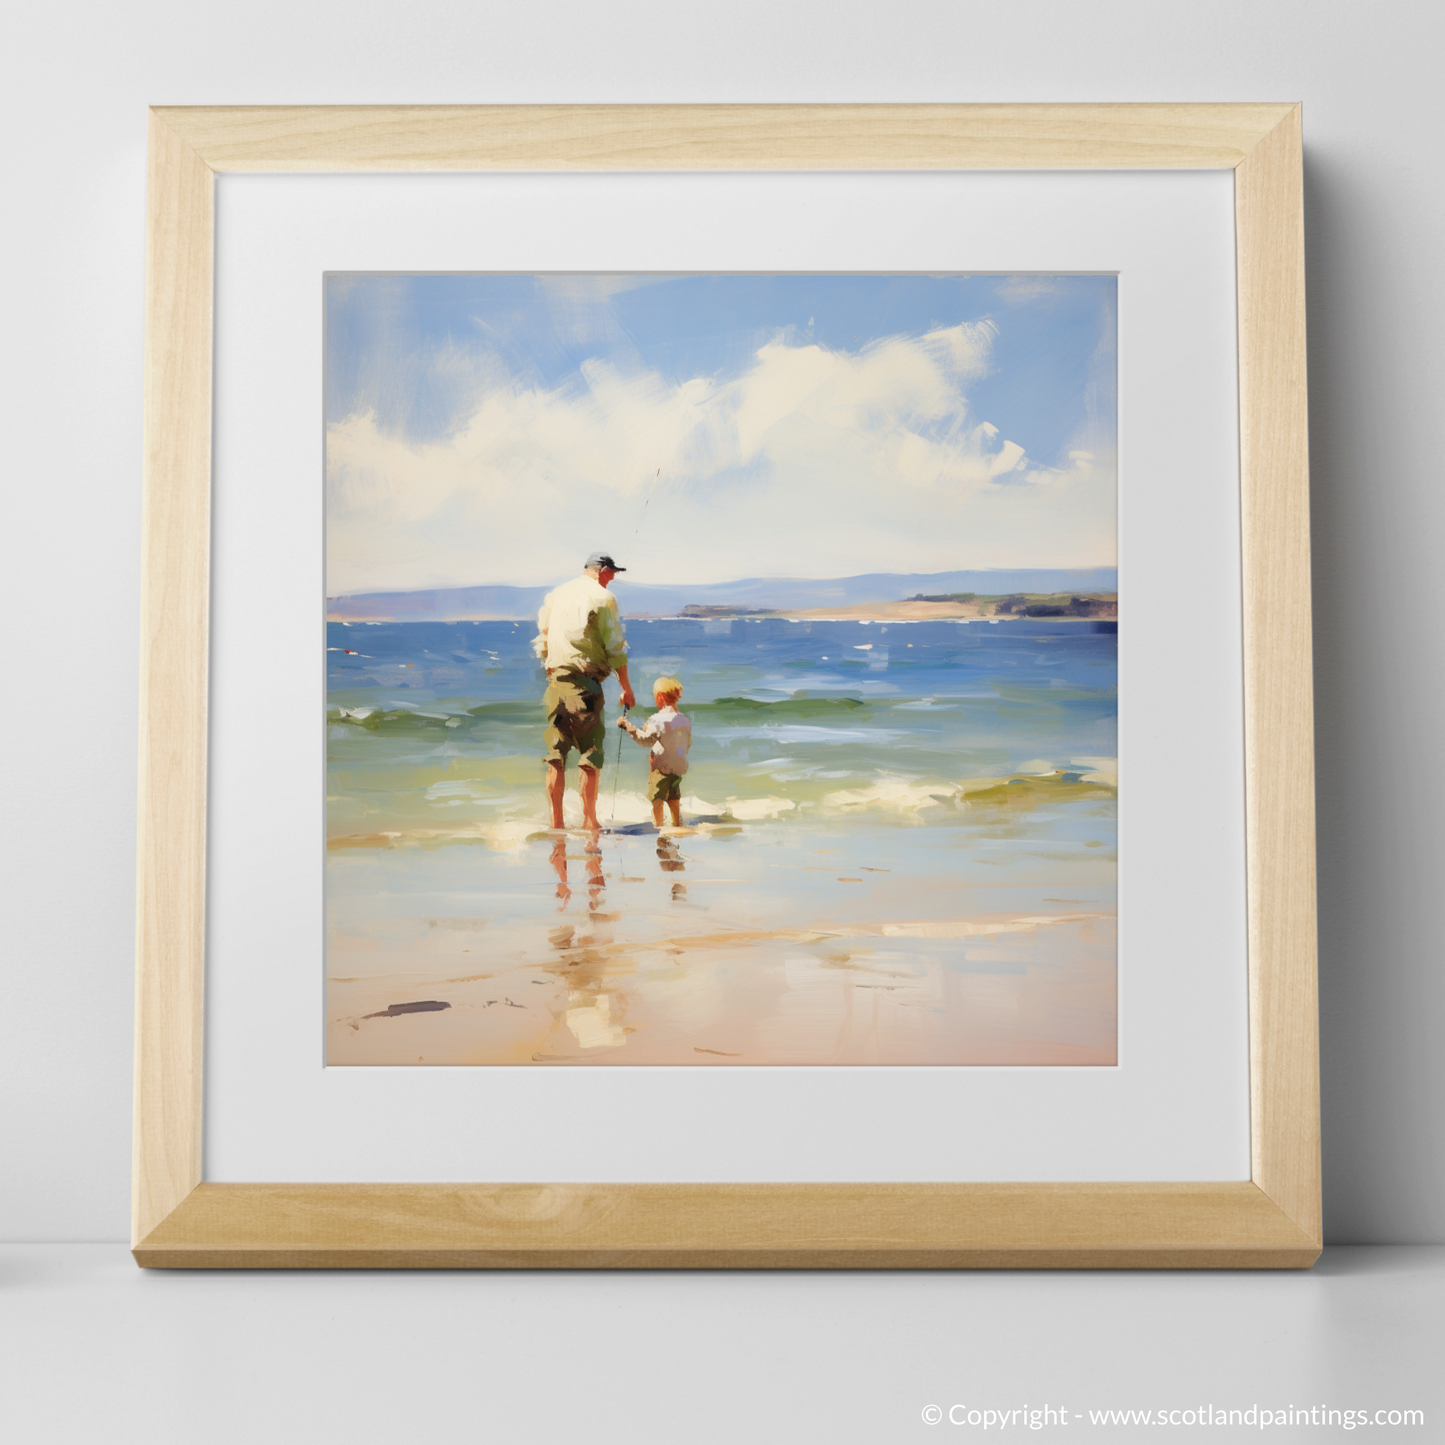 Art Print of A dad and son fishing at Rosemarkie Beach with a natural frame